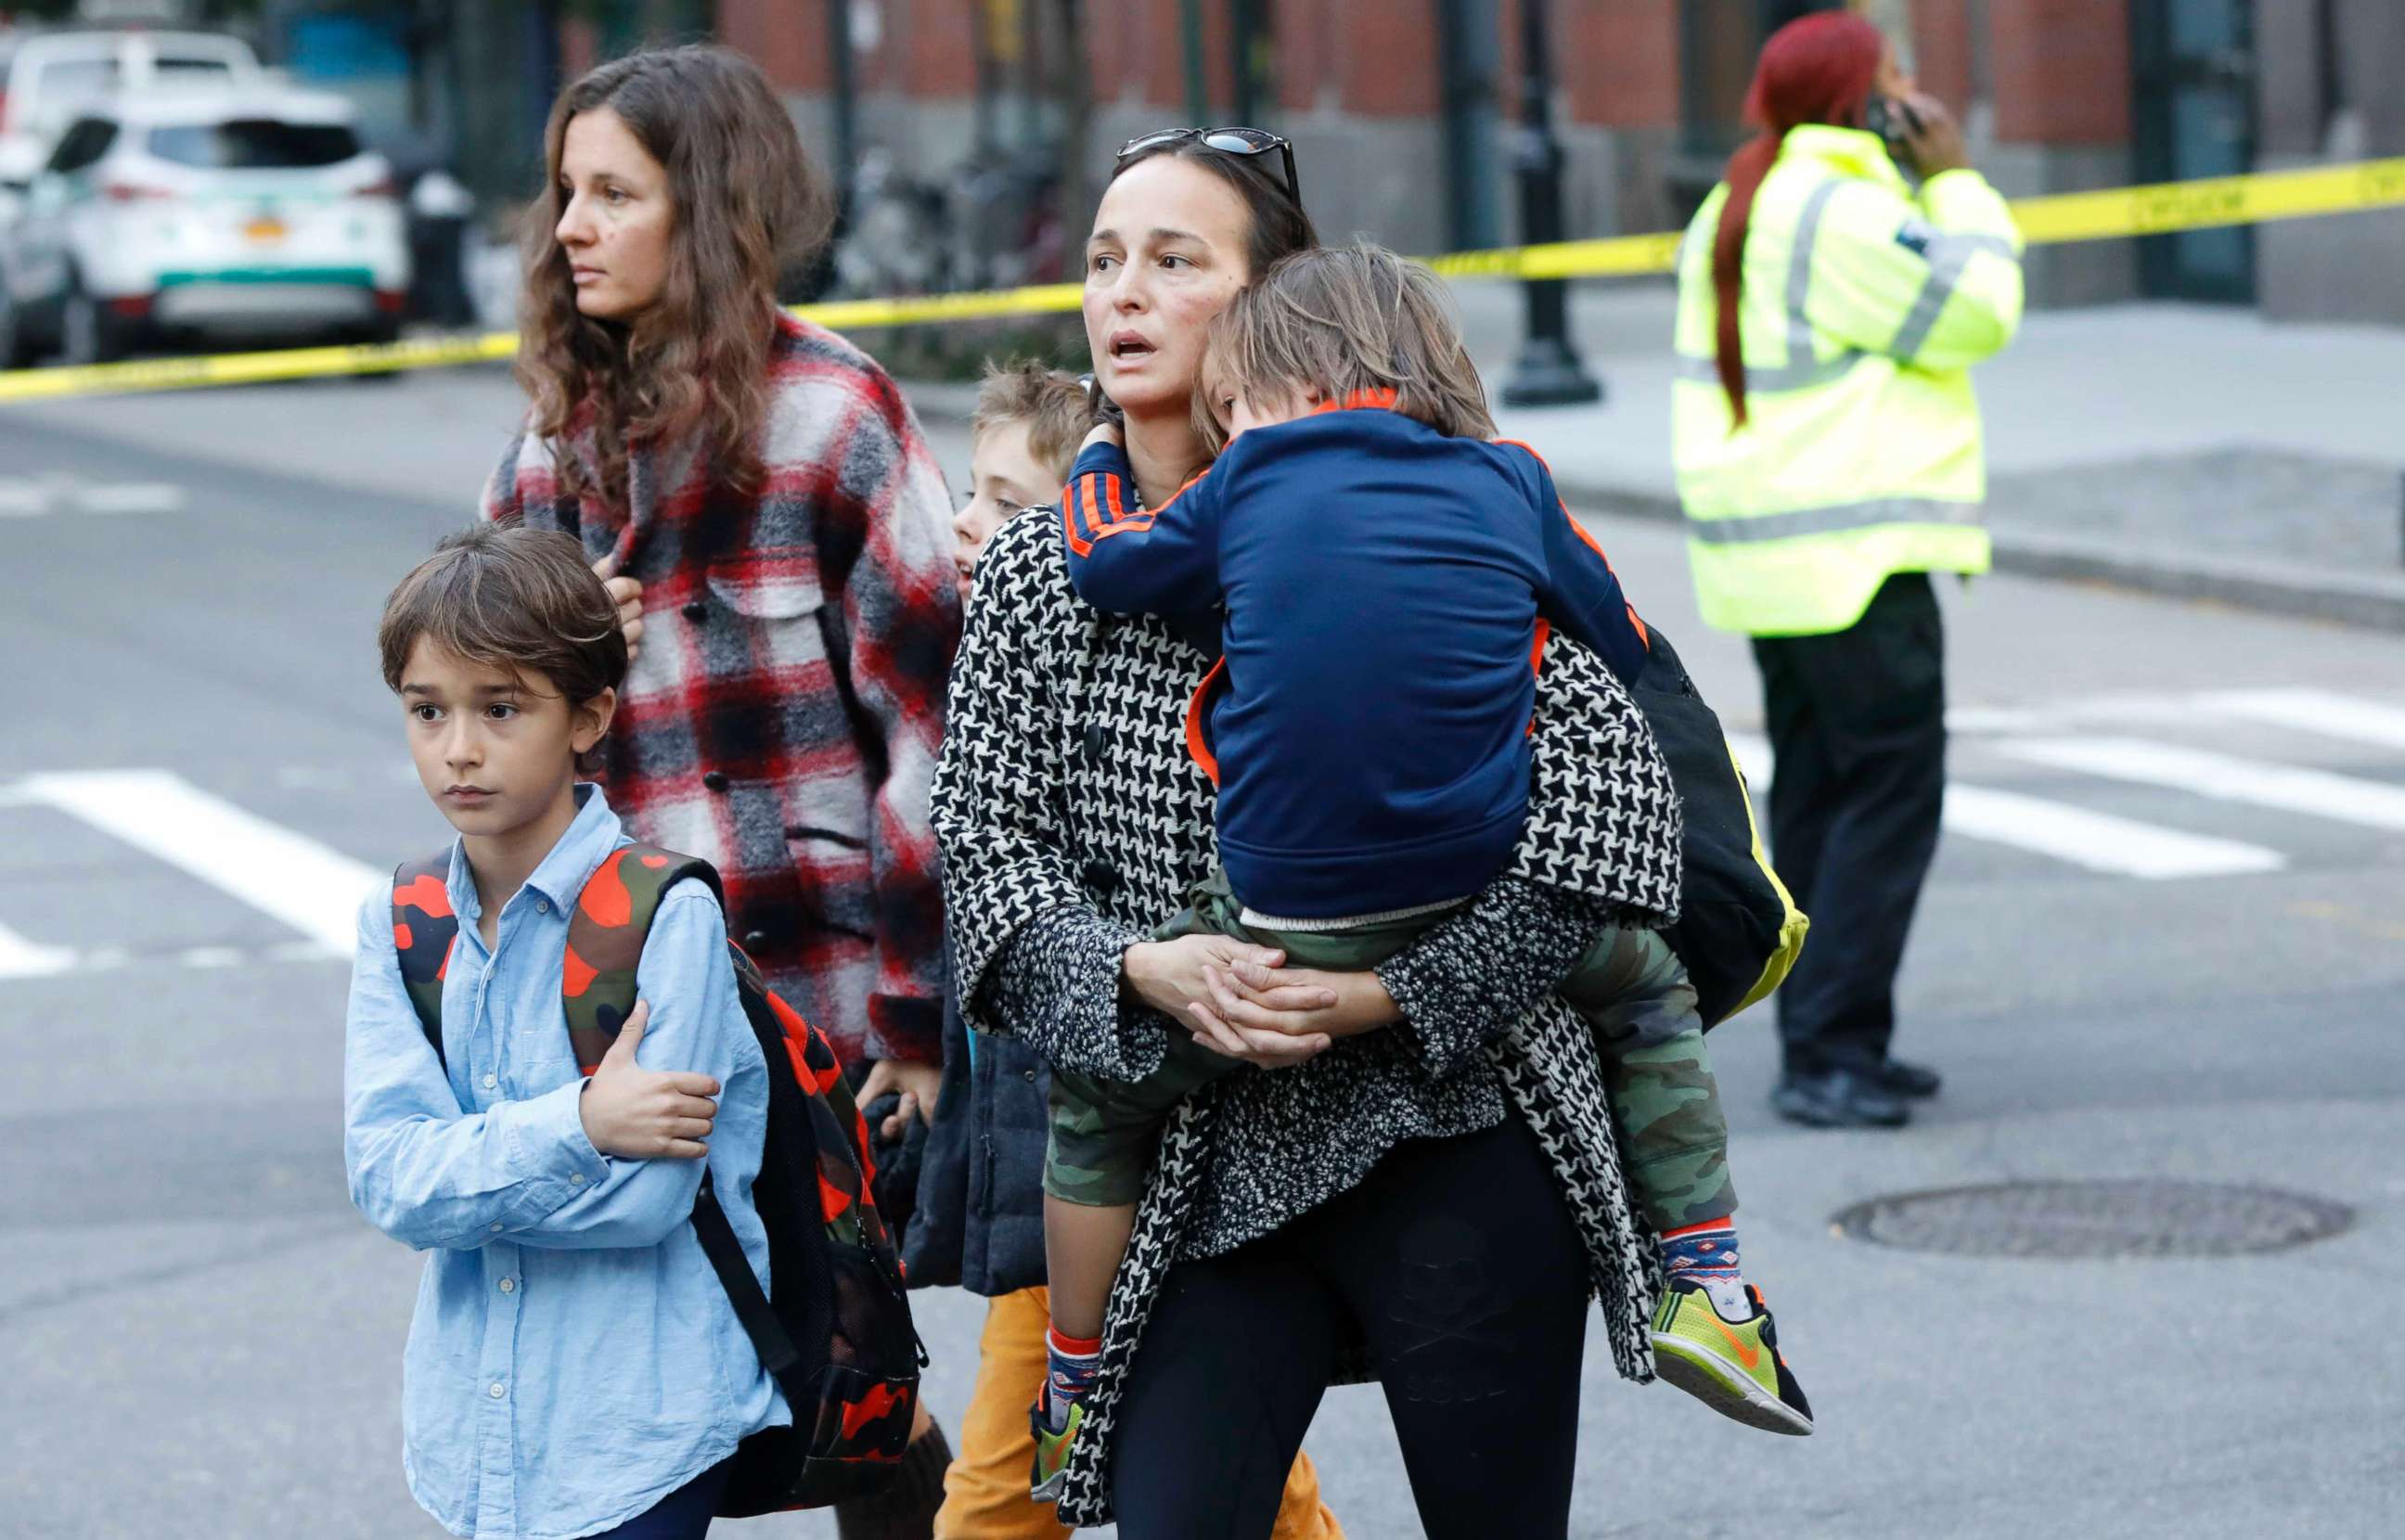 PHOTO: Parents pick up their children from P.S./I.S.-89 school after a shooting incident in New York City, Oct. 31, 2017.